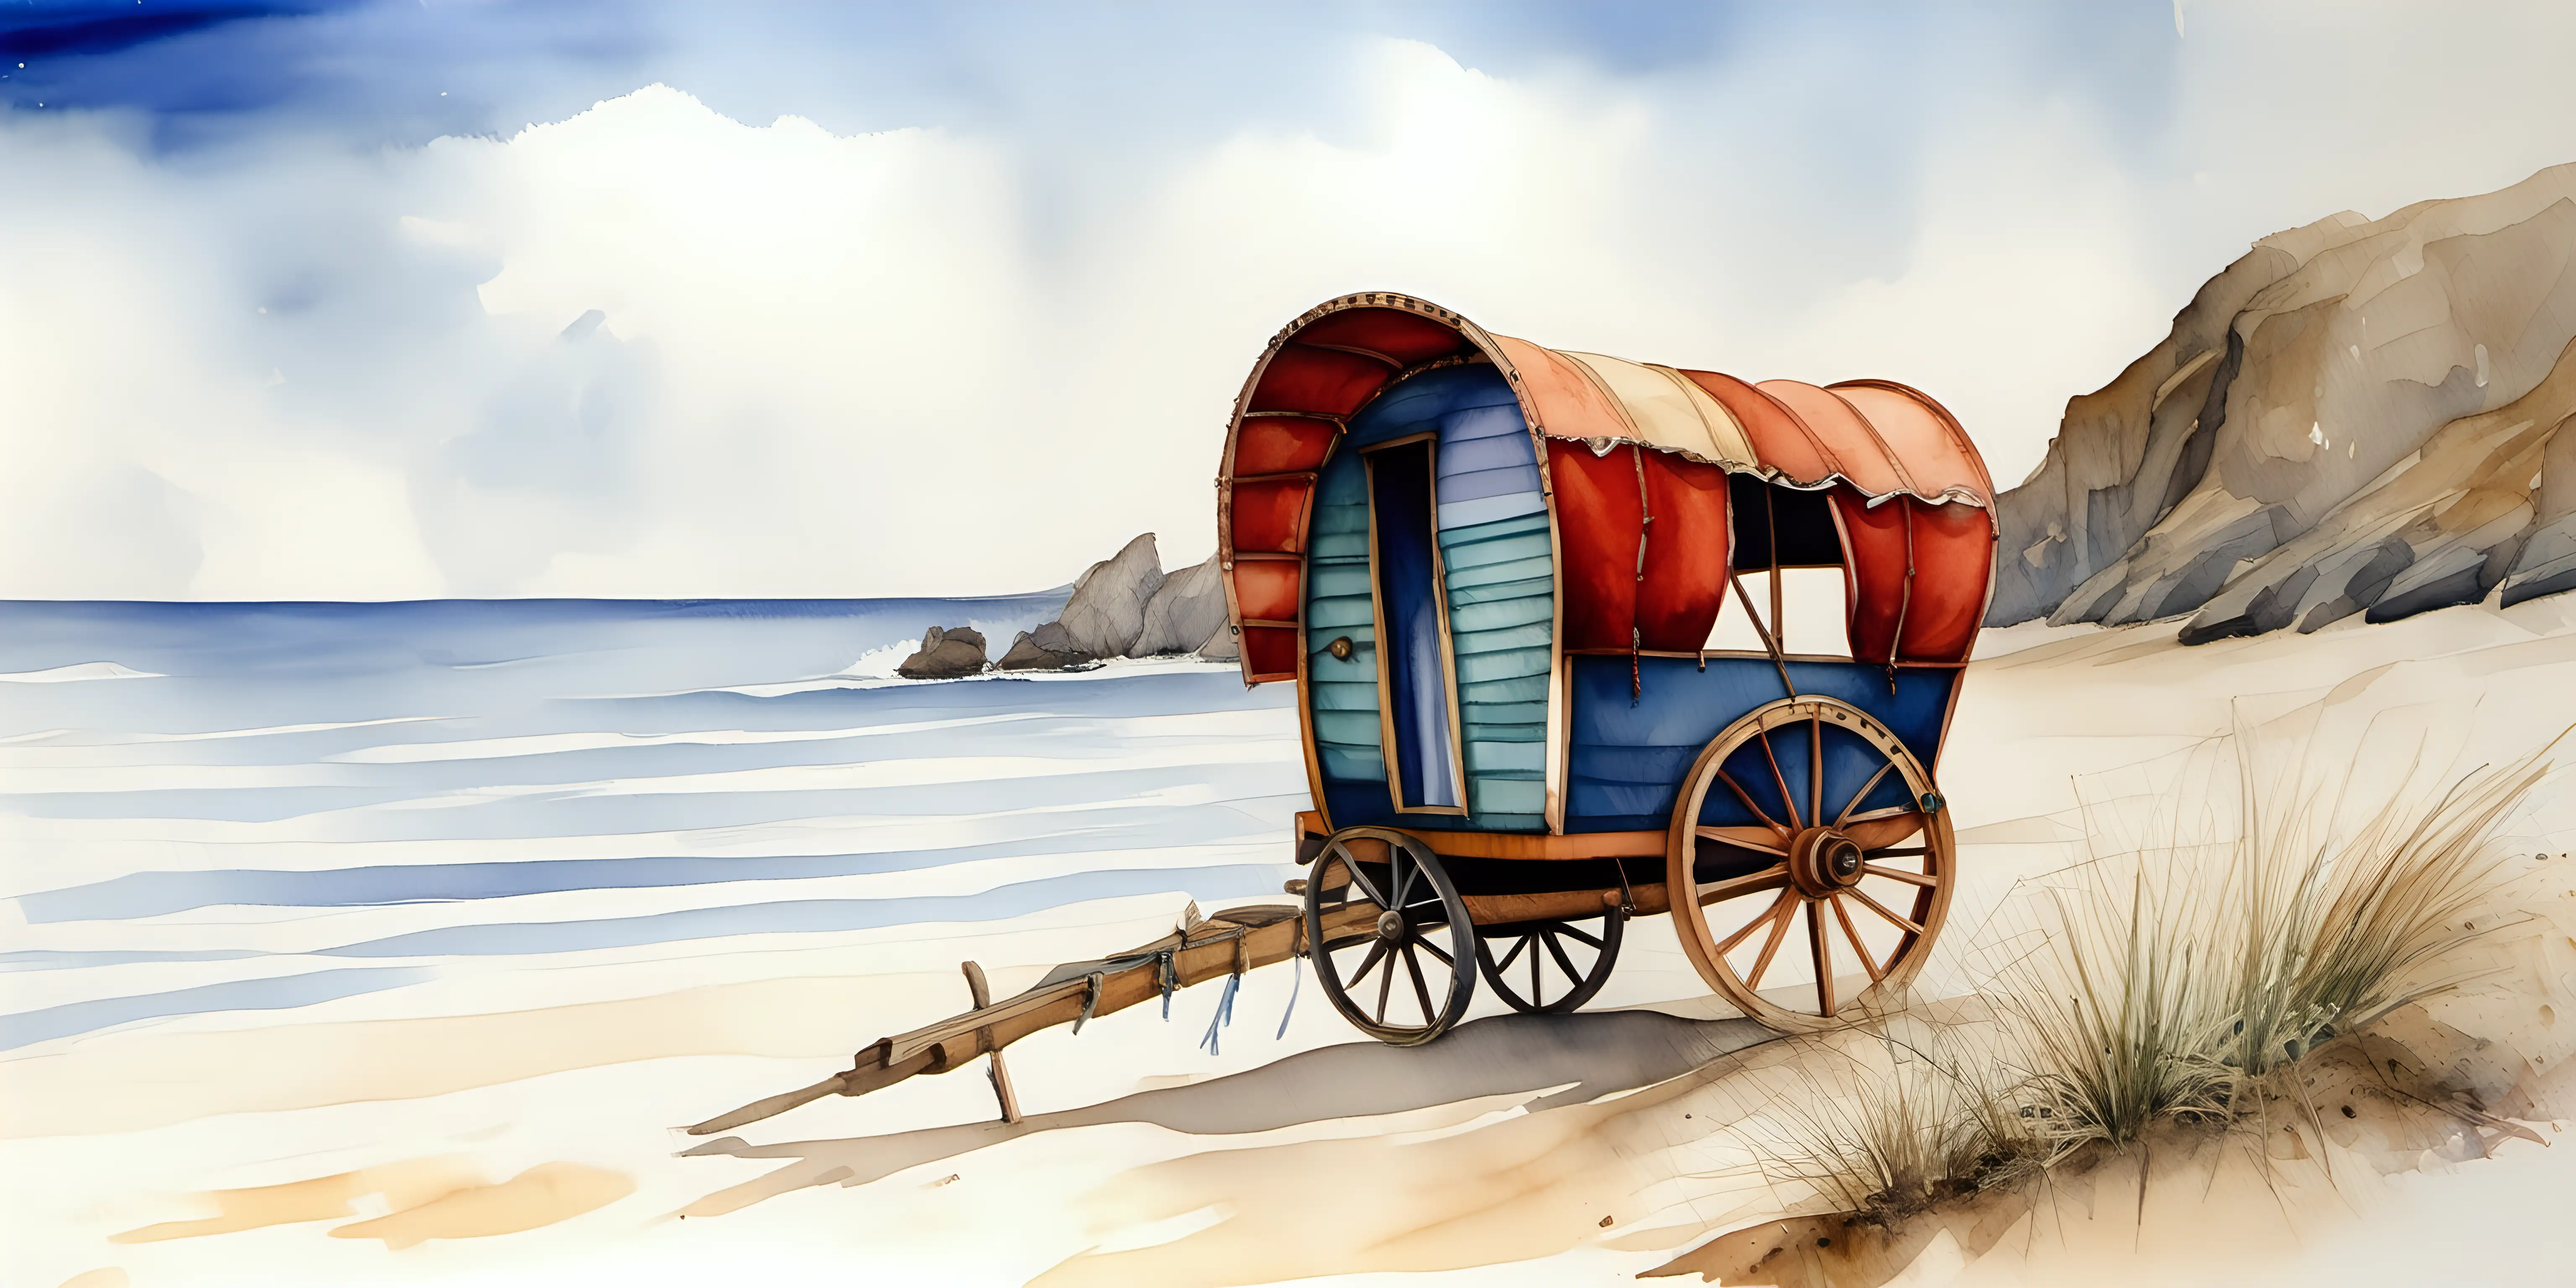 Romany Gypsy Wagon Watercolor Painting by the Seaside